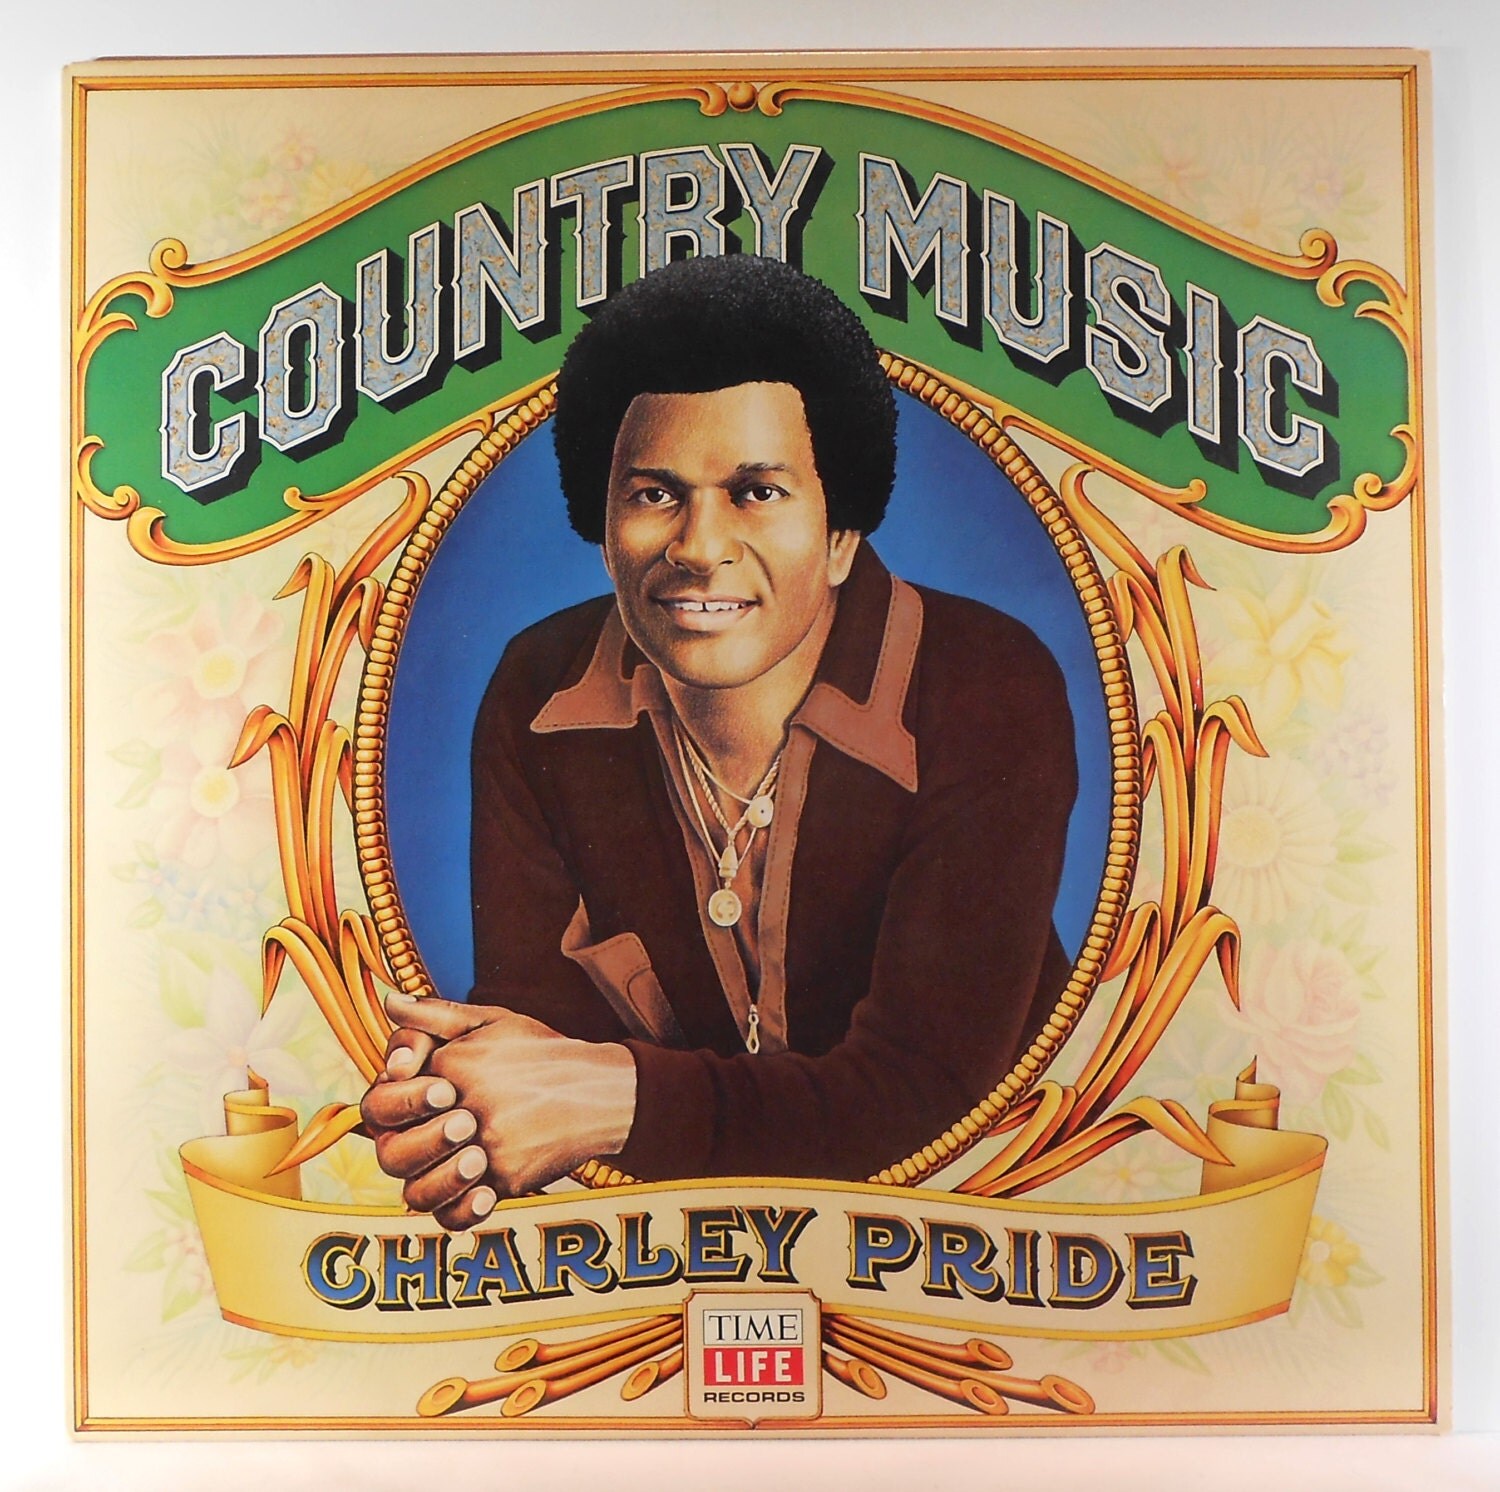 Charley Pride Country Music Time Life Records Vintage Vinyl LP